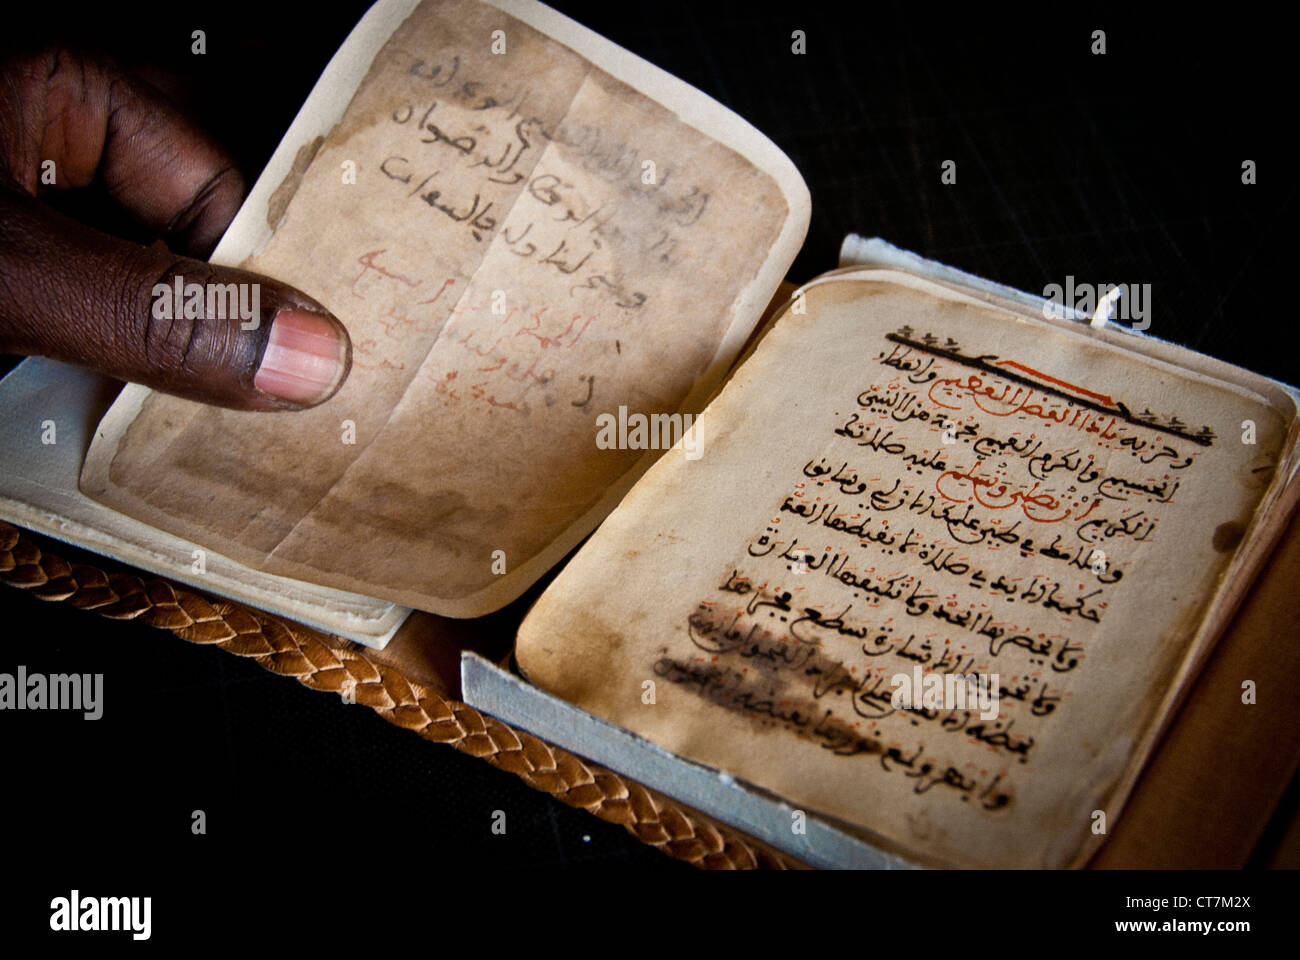 Manuscript Poetry book 15th been restored with Kite Kata paper from Japan, workshop of the CEDRAB.Timbuktu. Mali. Stock Photo